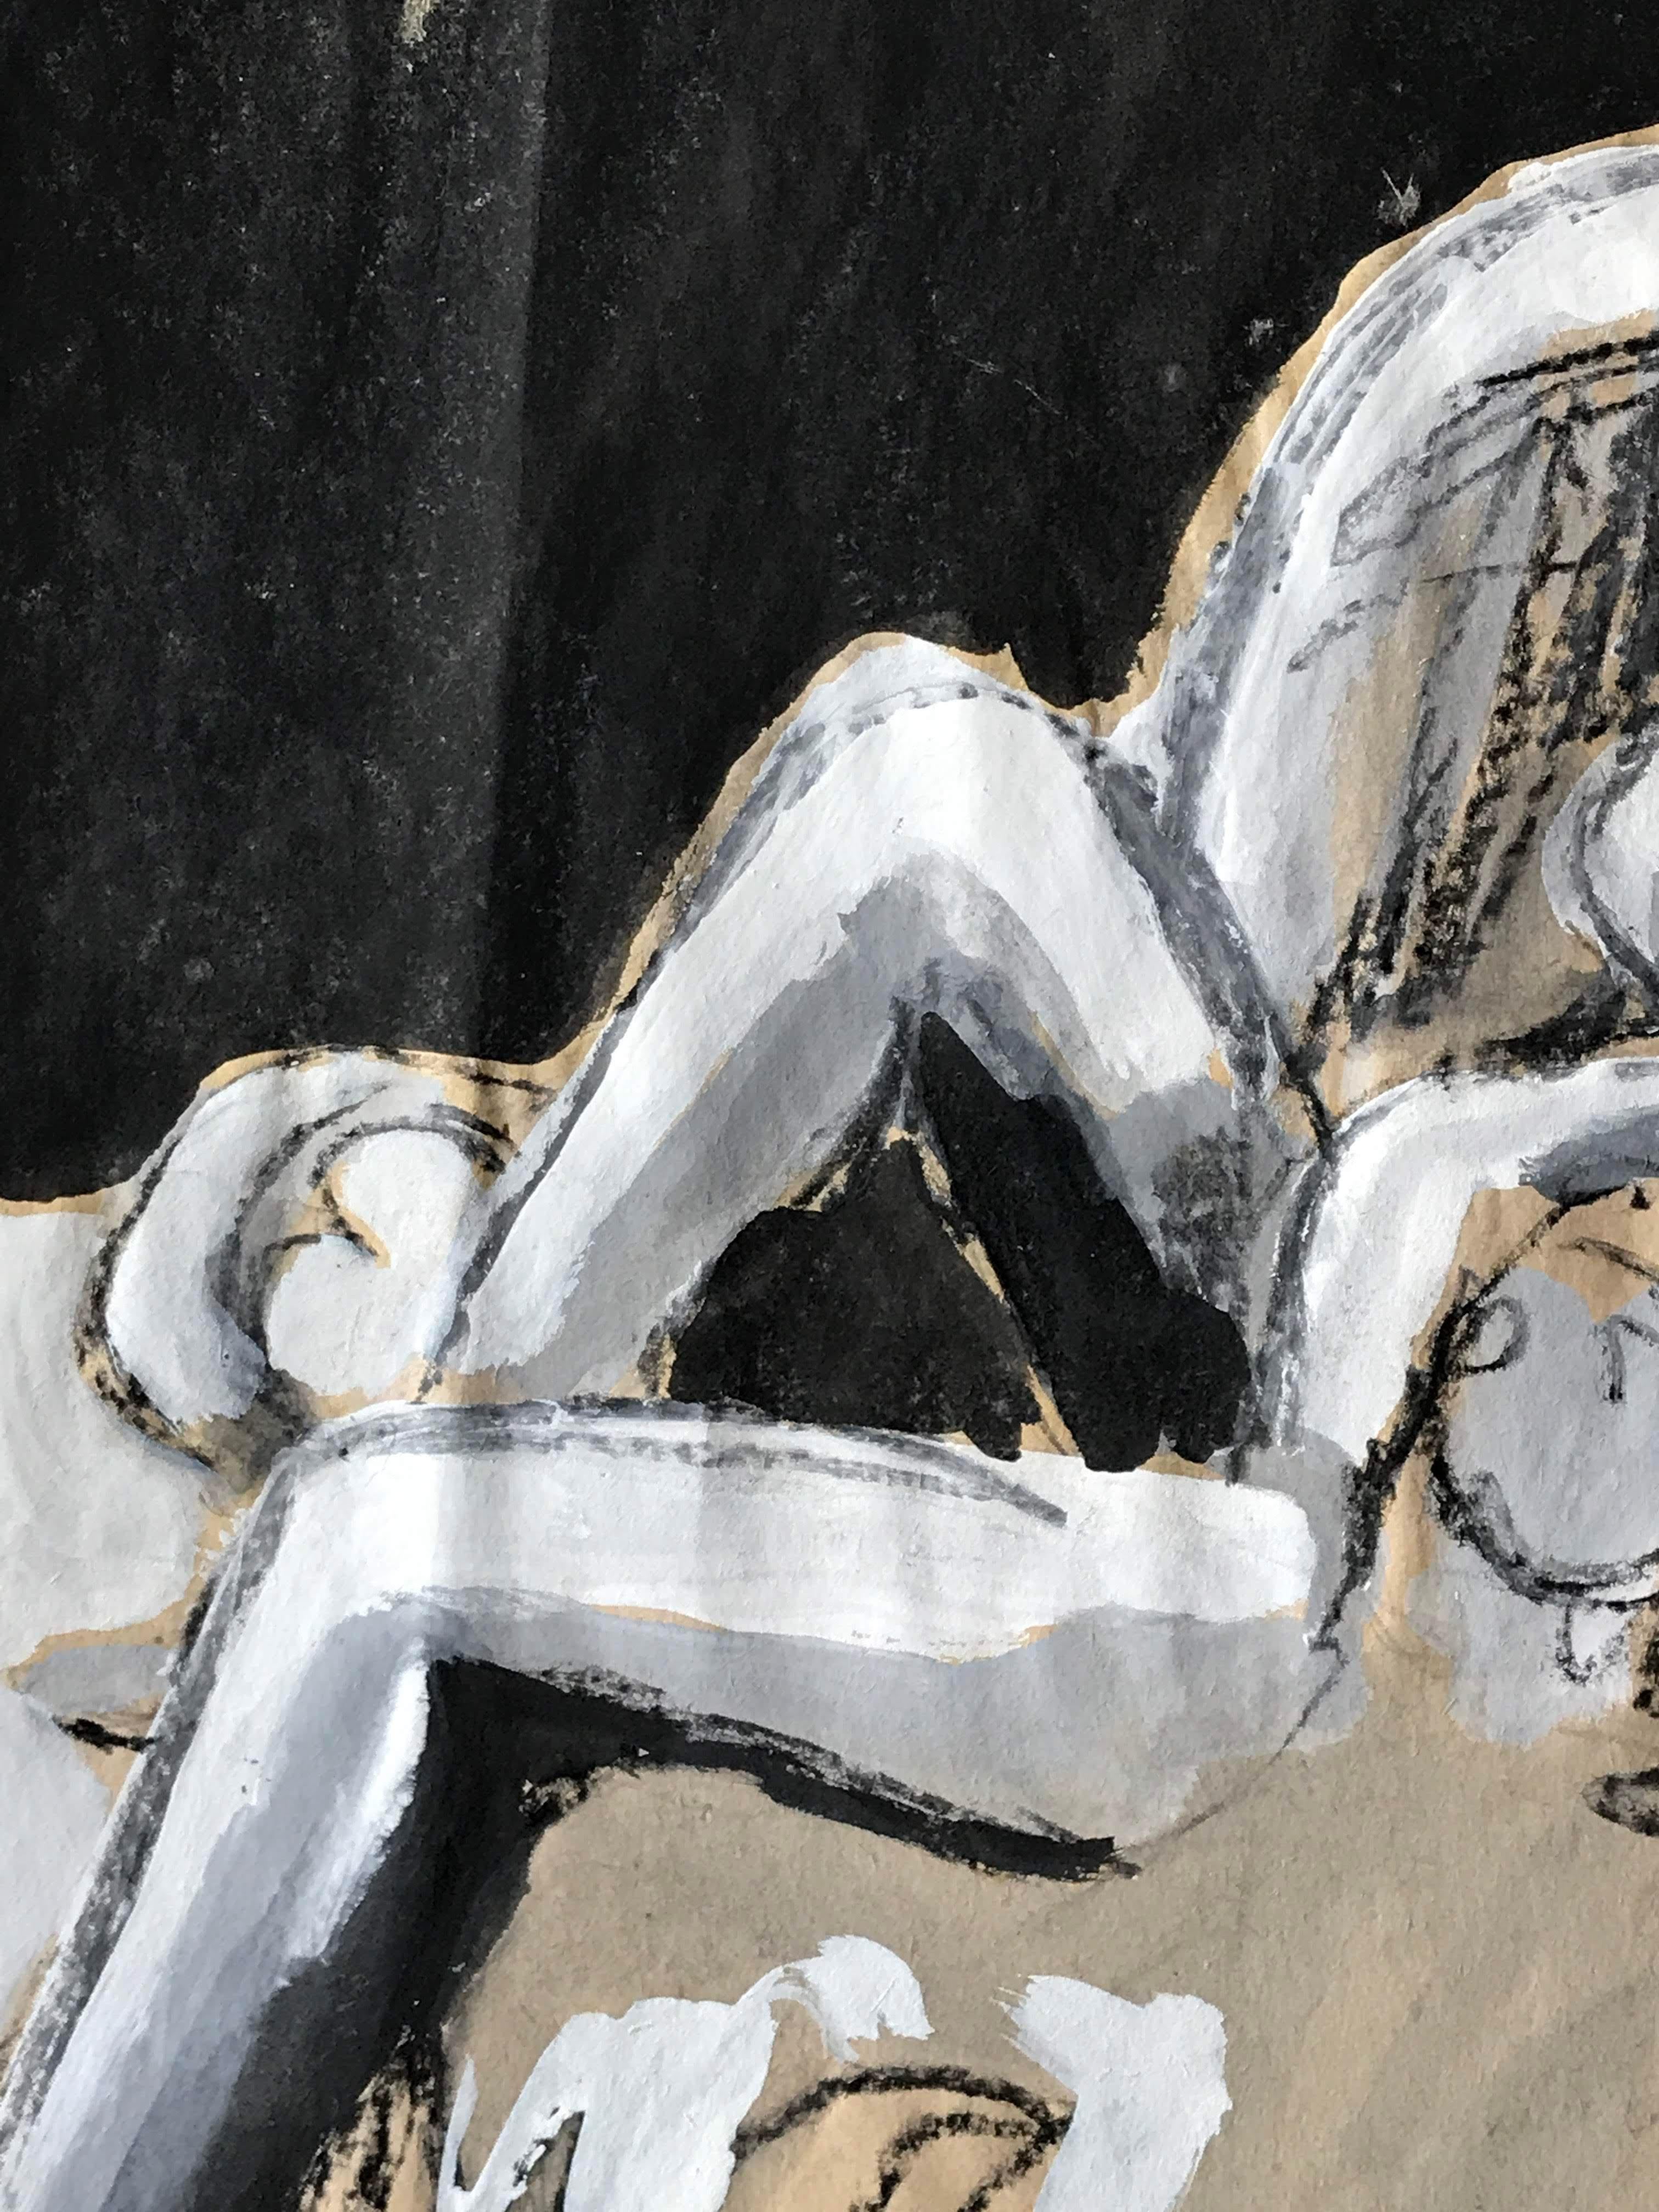 Gloria Dudfield
Leaning in Chair
1960's
Gouache and Charcoal on Paper
11.75